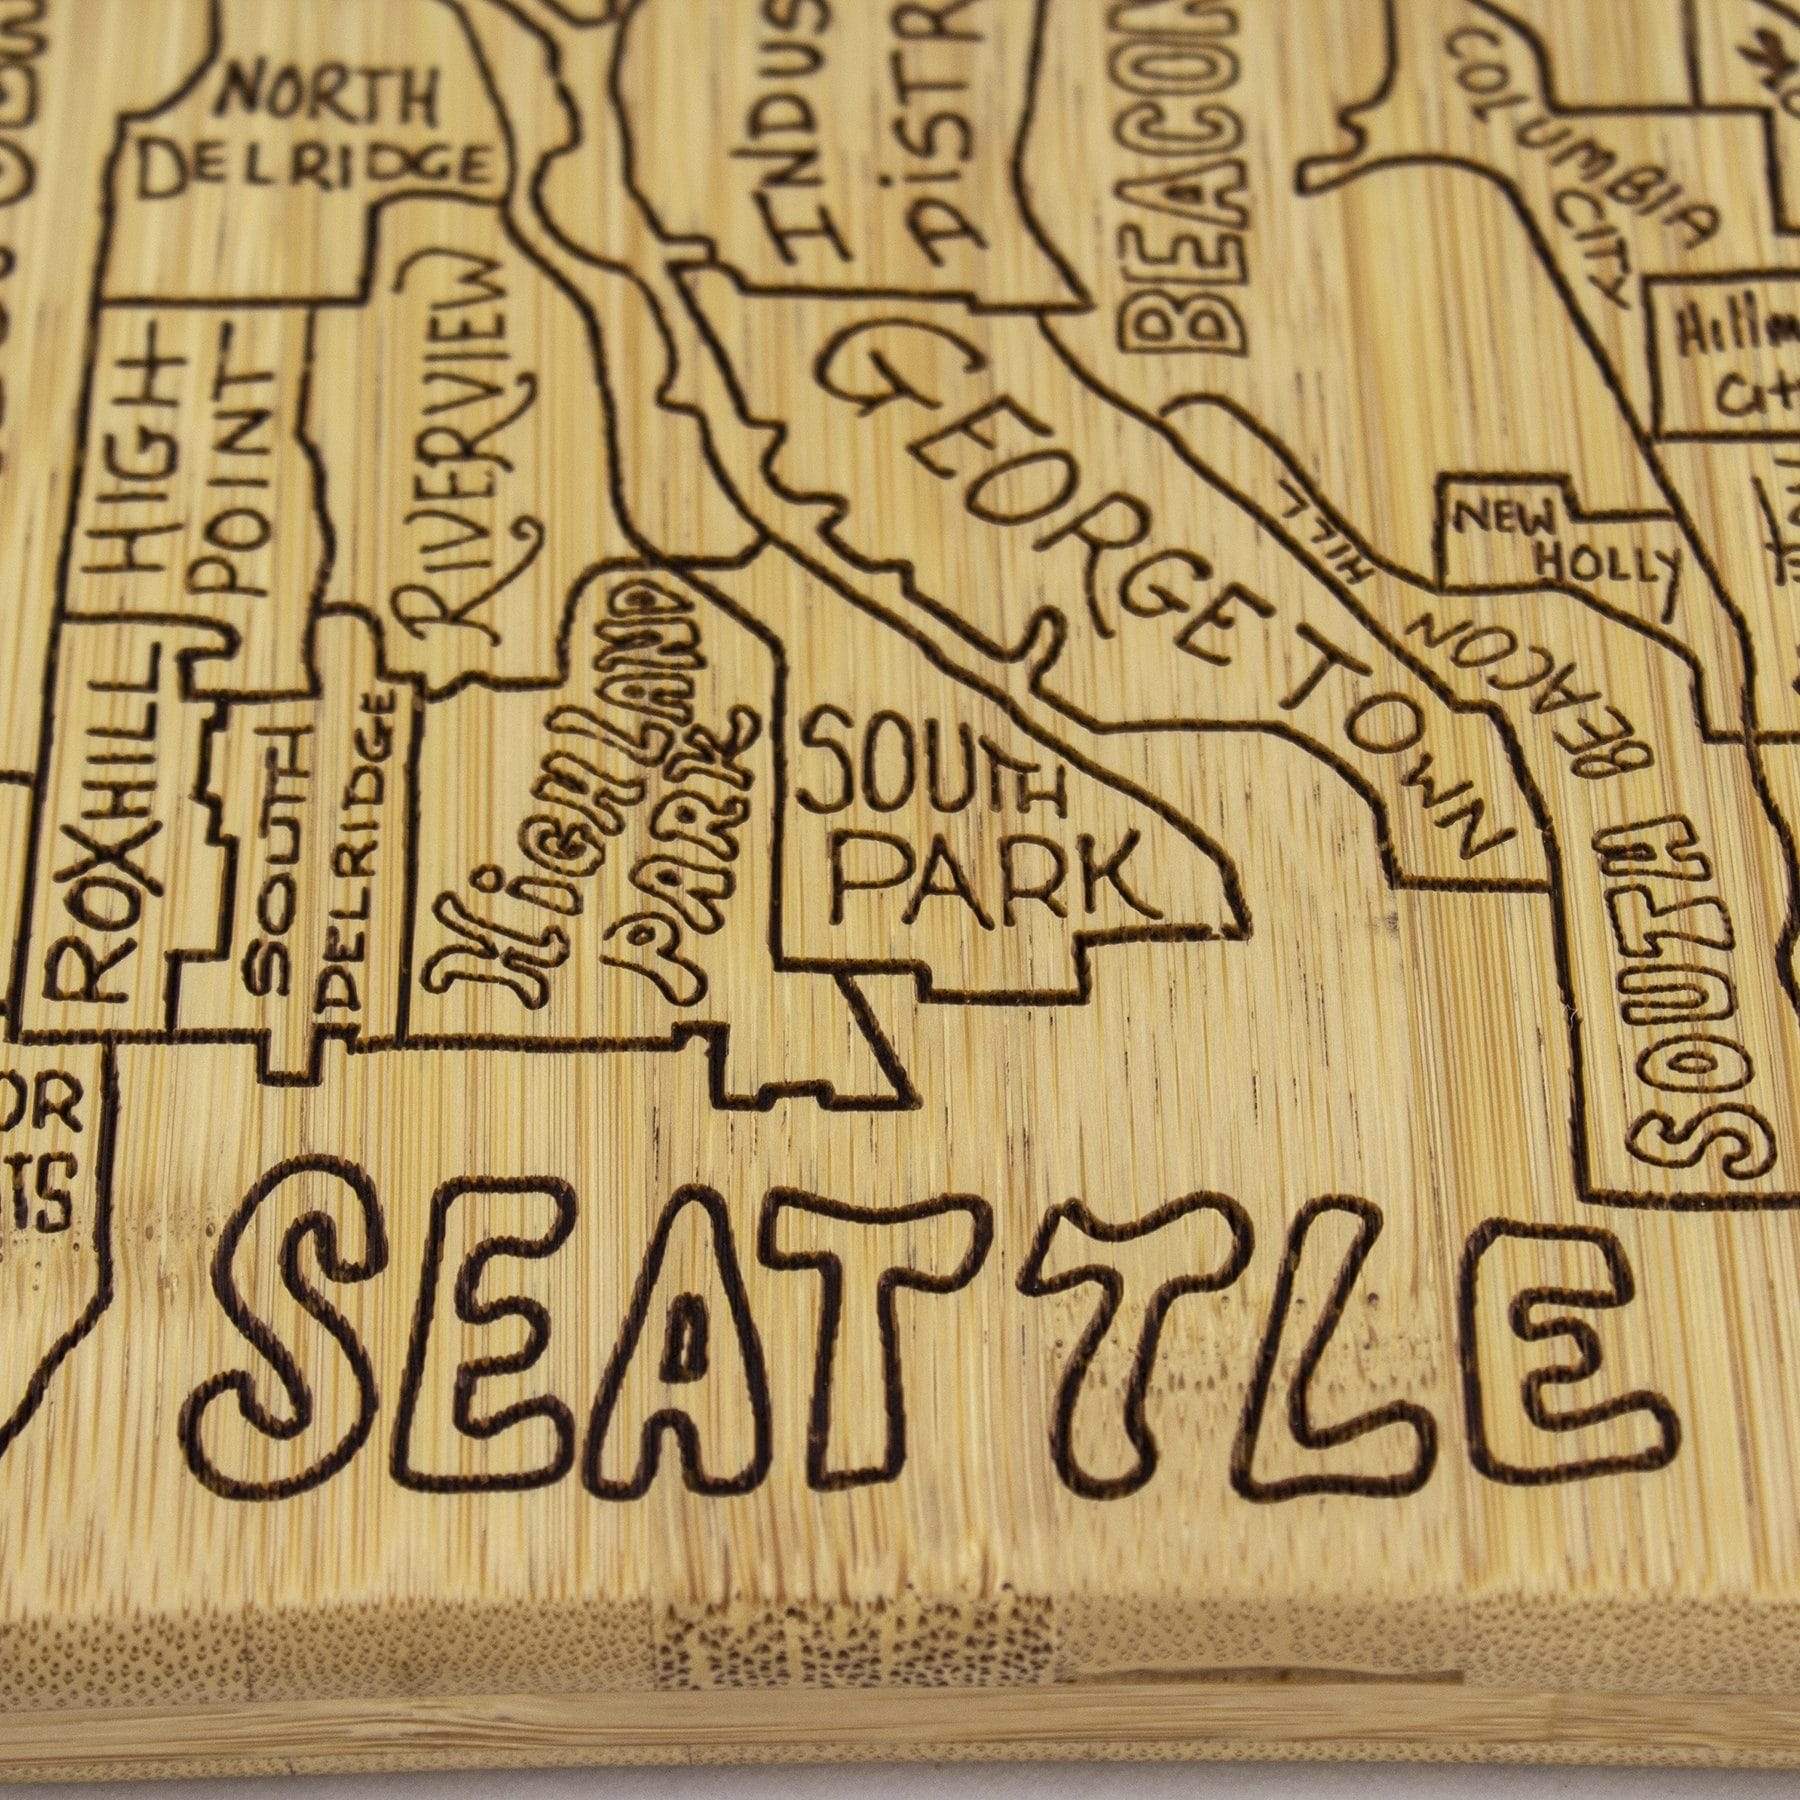 Totally Bamboo Seattle City Life Bamboo Serving and Cutting Board